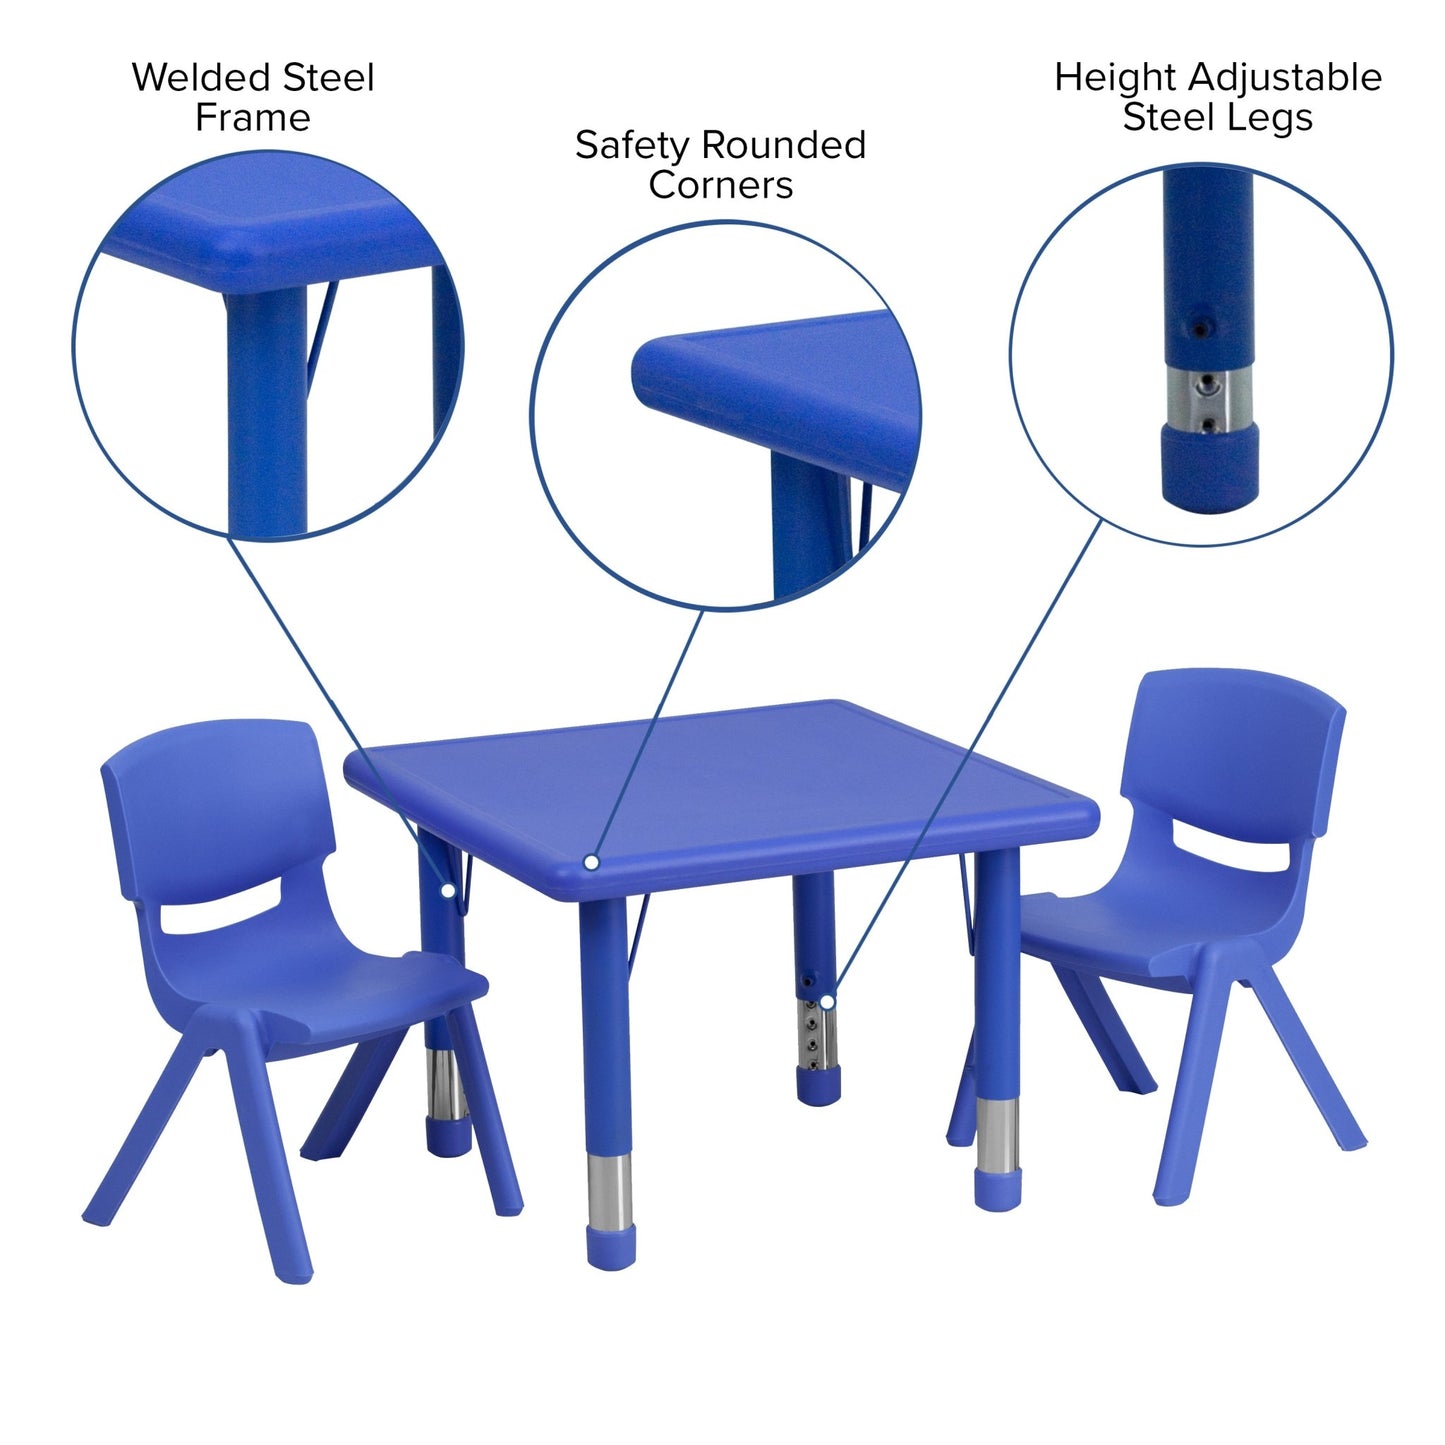 Emmy 24'' Square Plastic Height Adjustable Activity Table Set with 2 Chairs - SchoolOutlet